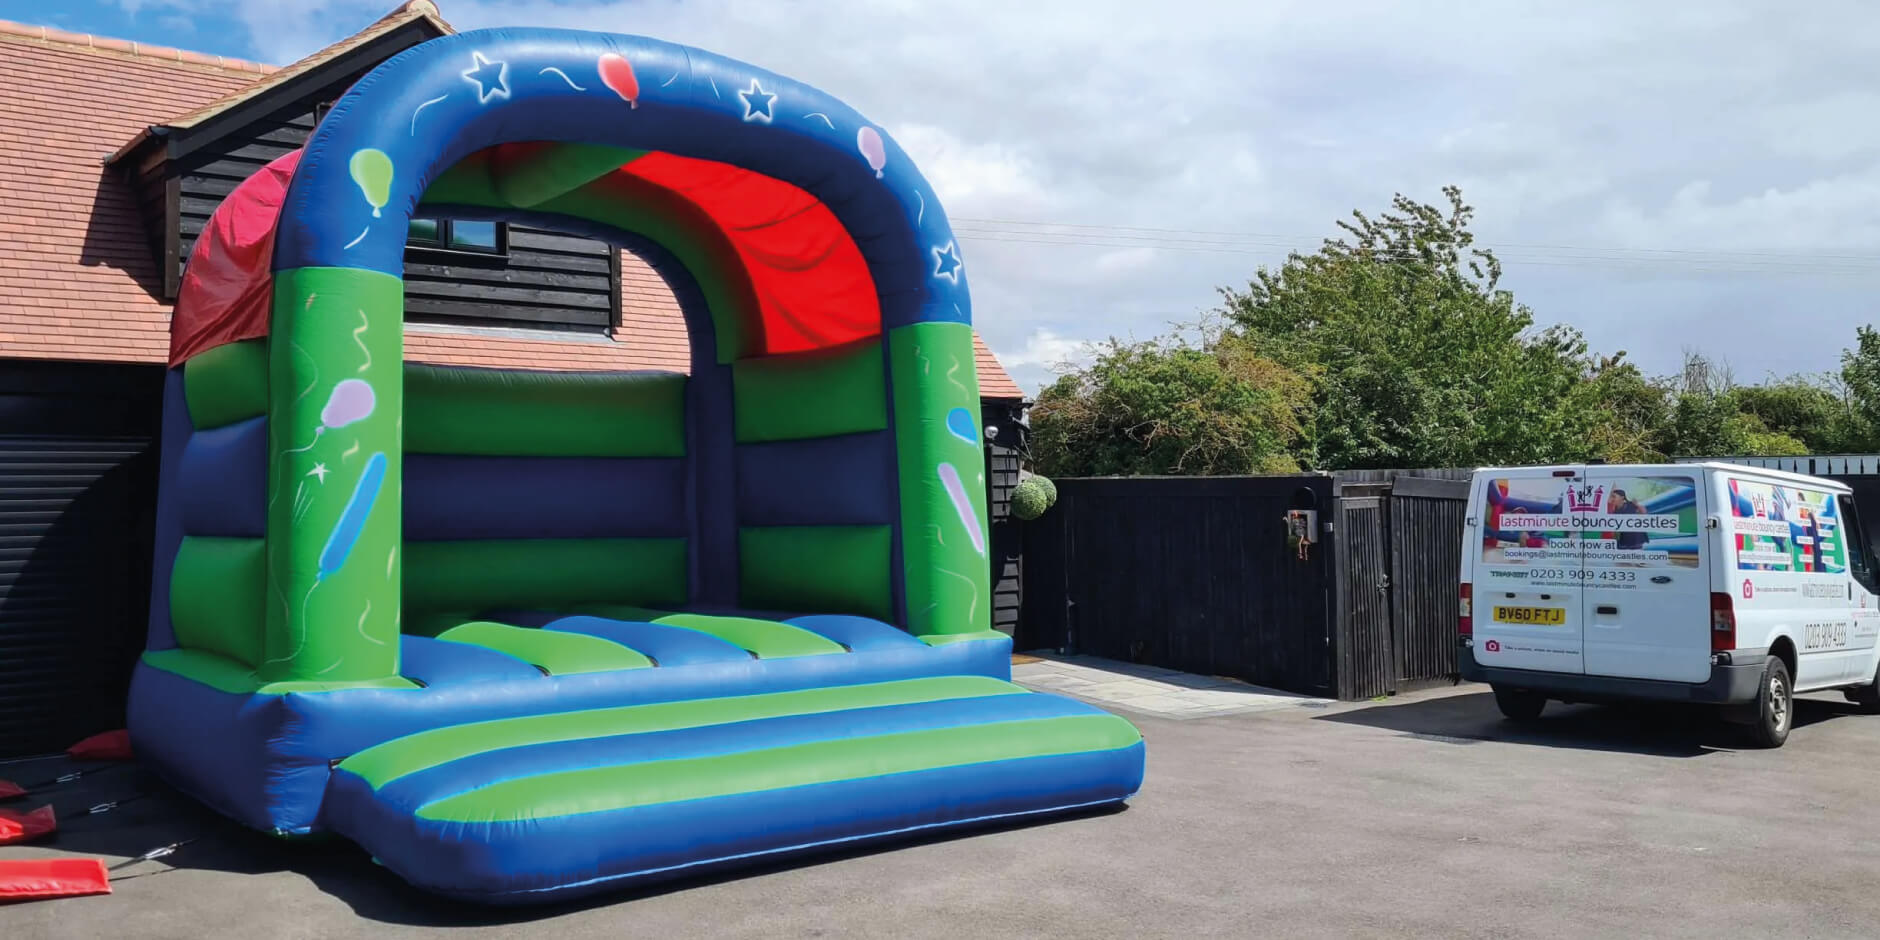 How to Choose the Perfect Bouncy Castle for Your Child's Party in Borehamwood